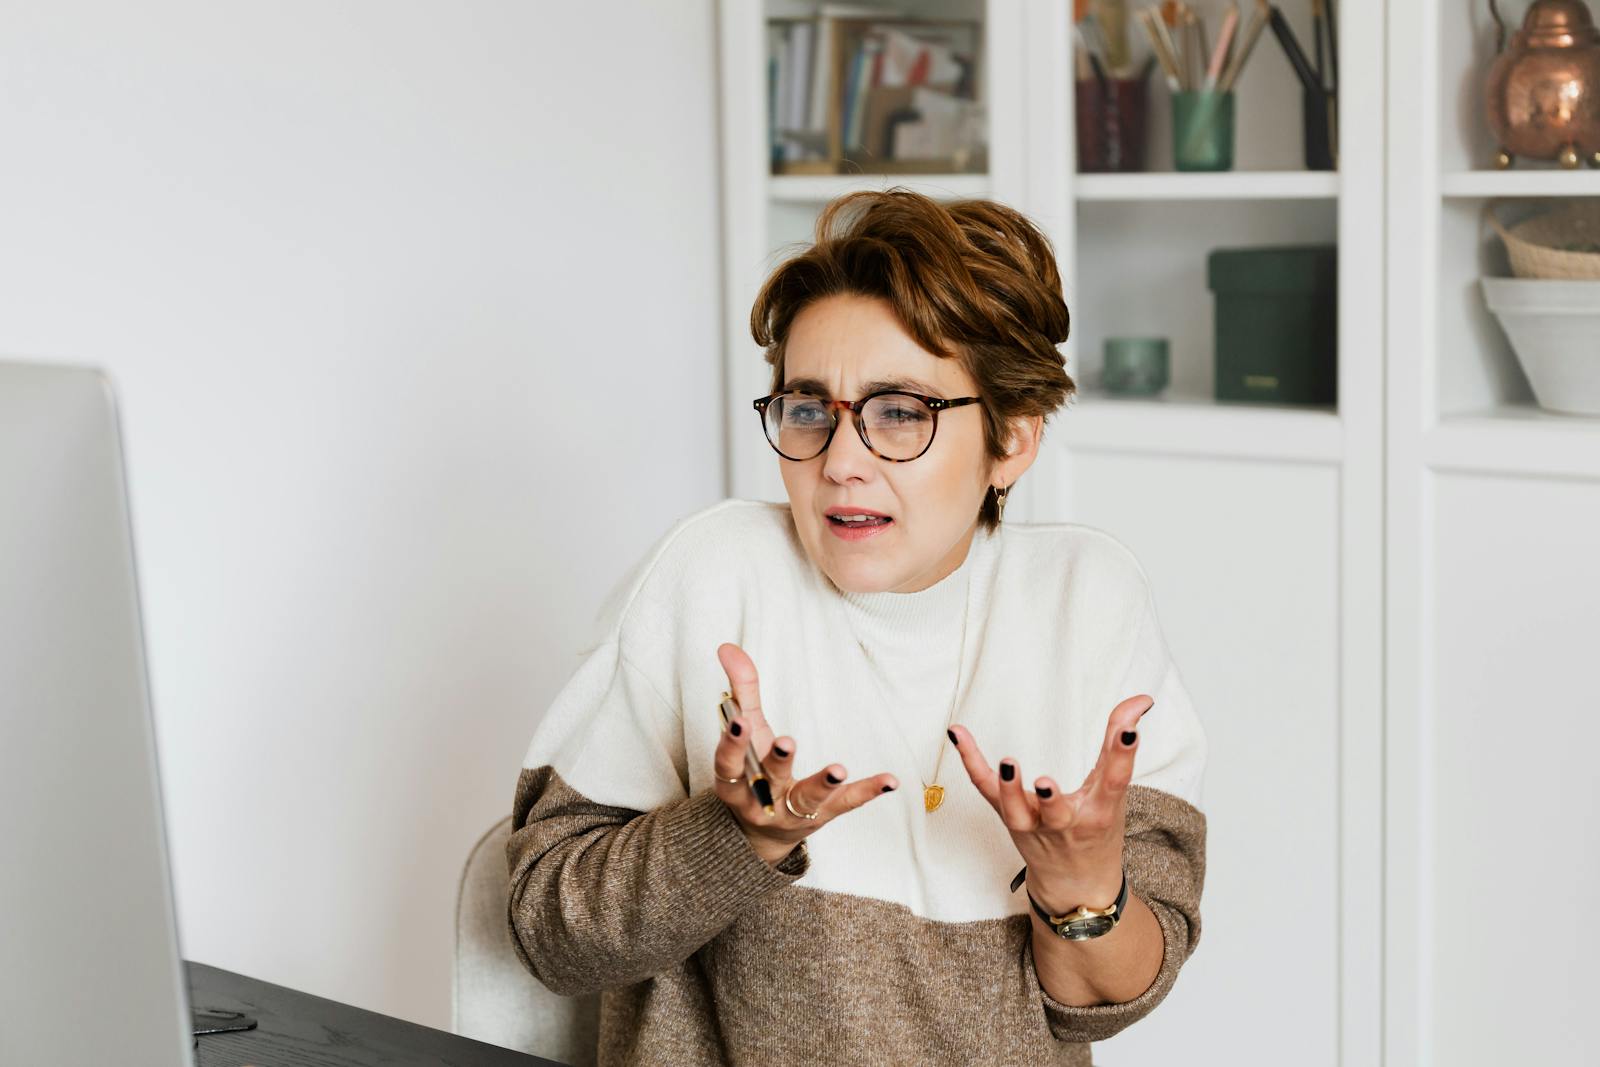 Expressive middle aged woman in casual outfit and eyeglasses gesticulating while having video conversation on computer in modern office